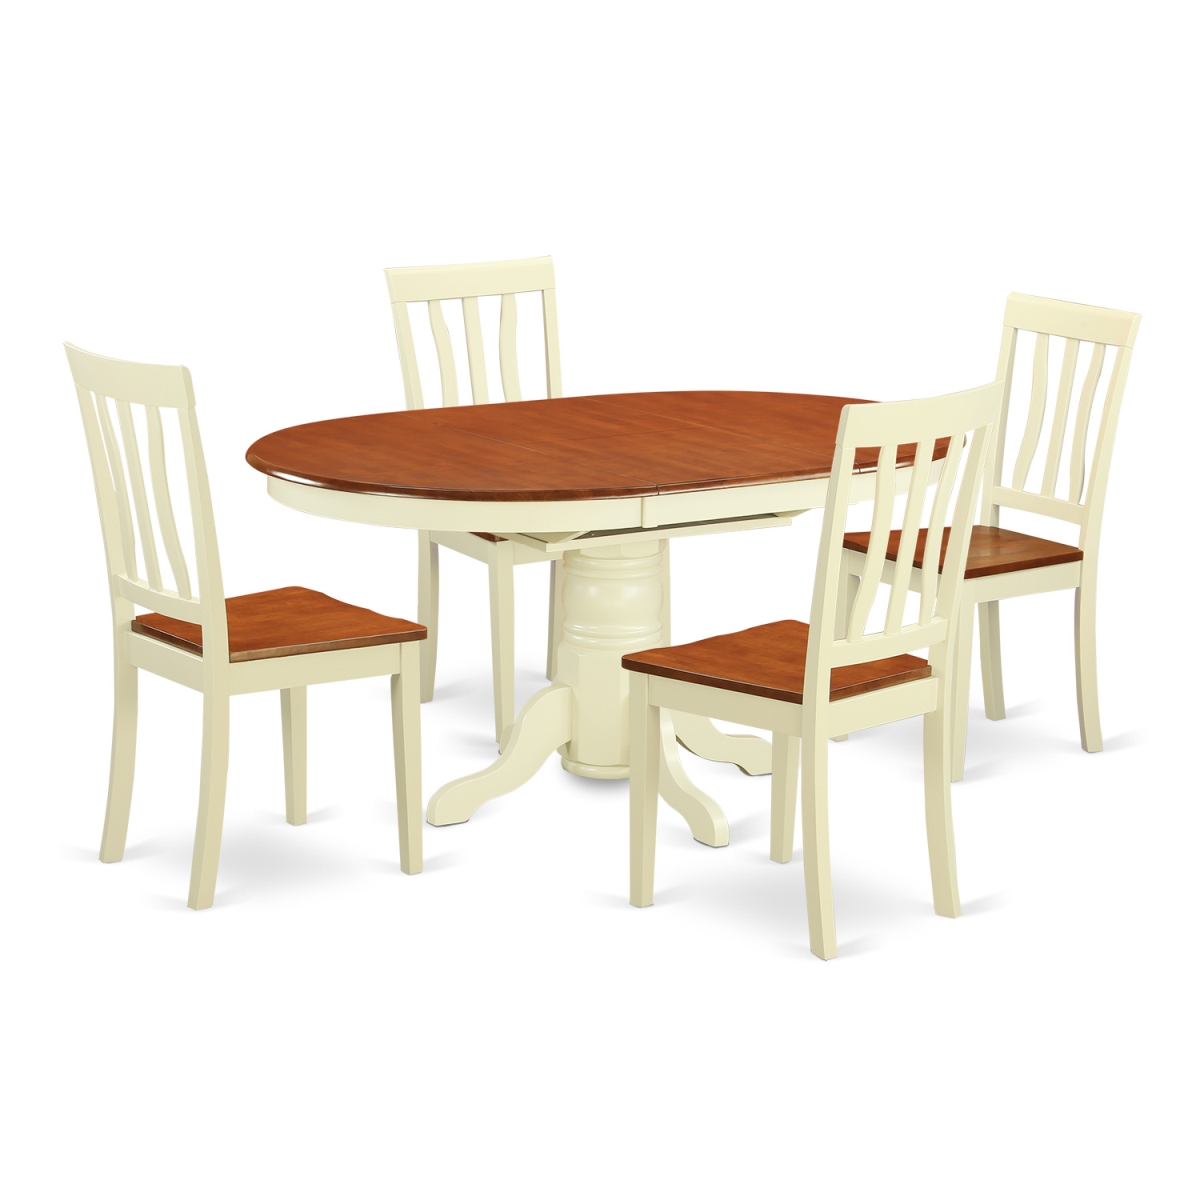 AVAT5-WHI-W Table & Chair Set with 4 Dining Table & 4 Chairs, Buttermilk & Cherry - 5 Piece -  East West Furniture